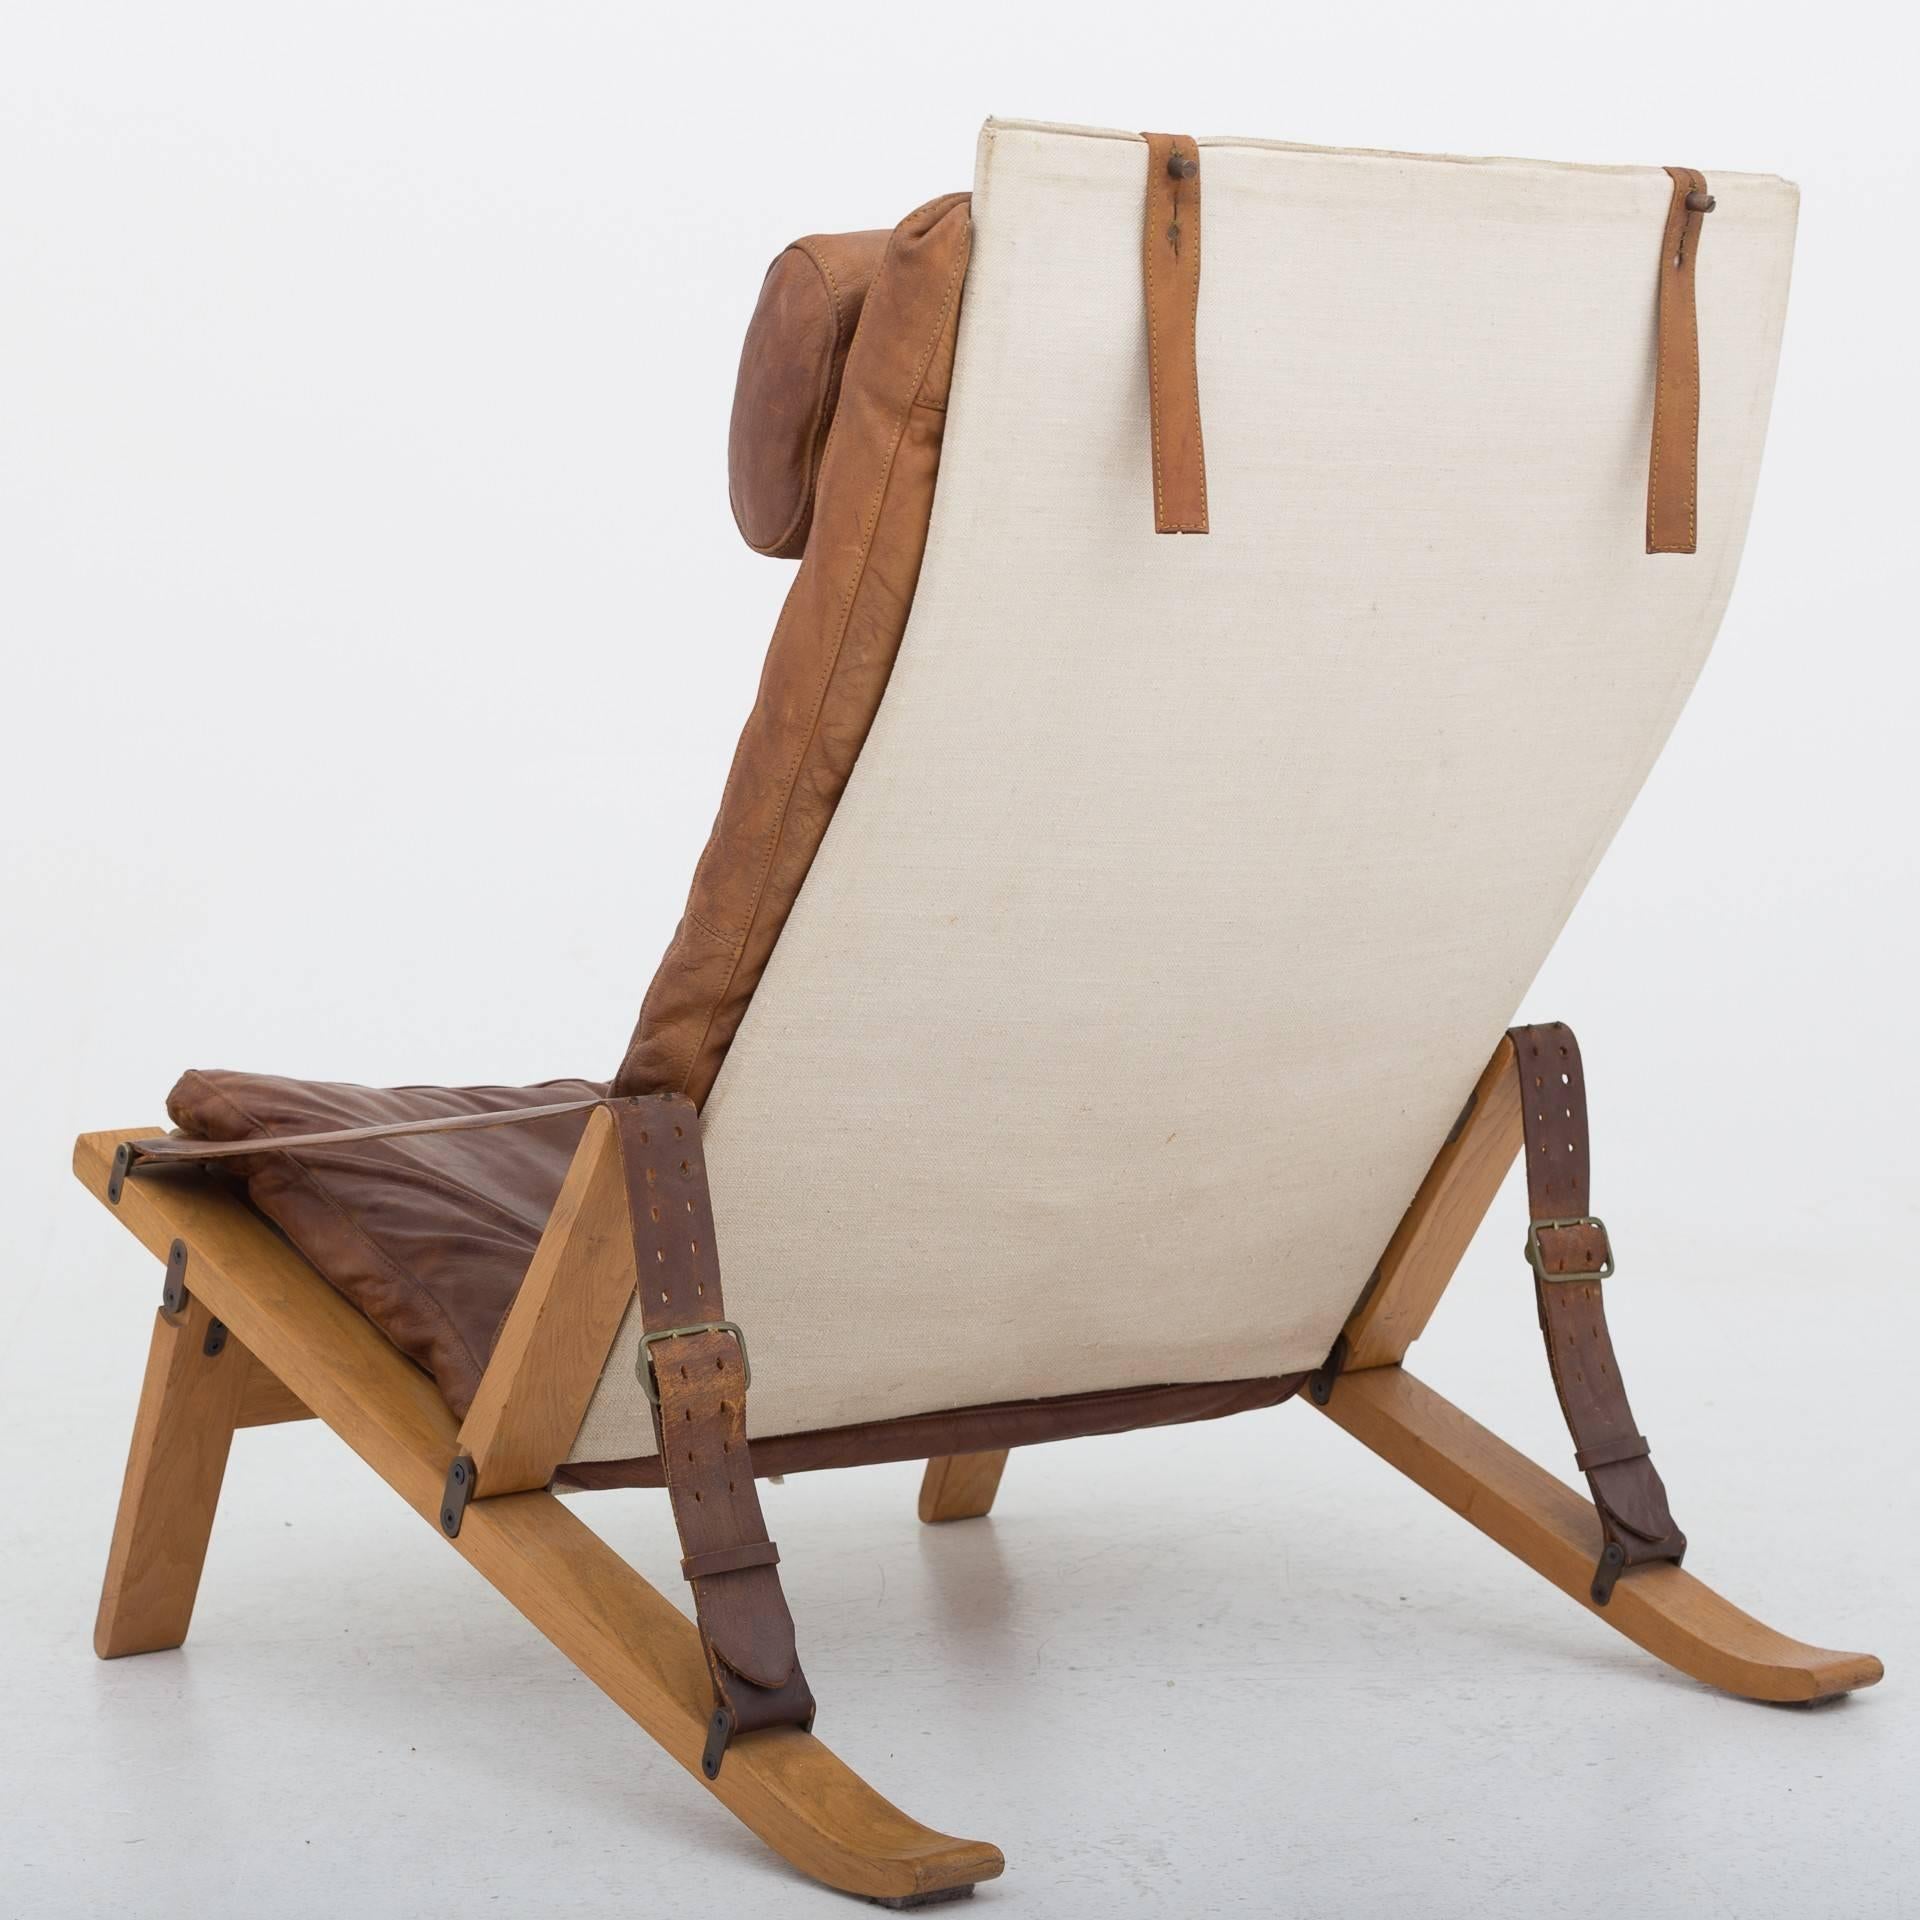 Two lounge chairs in oak, patinated brown leather and canvas. Designed by Preben Fabricius and Jørgen Kastholm. Maker cabinetmaker Poul Bachmann.